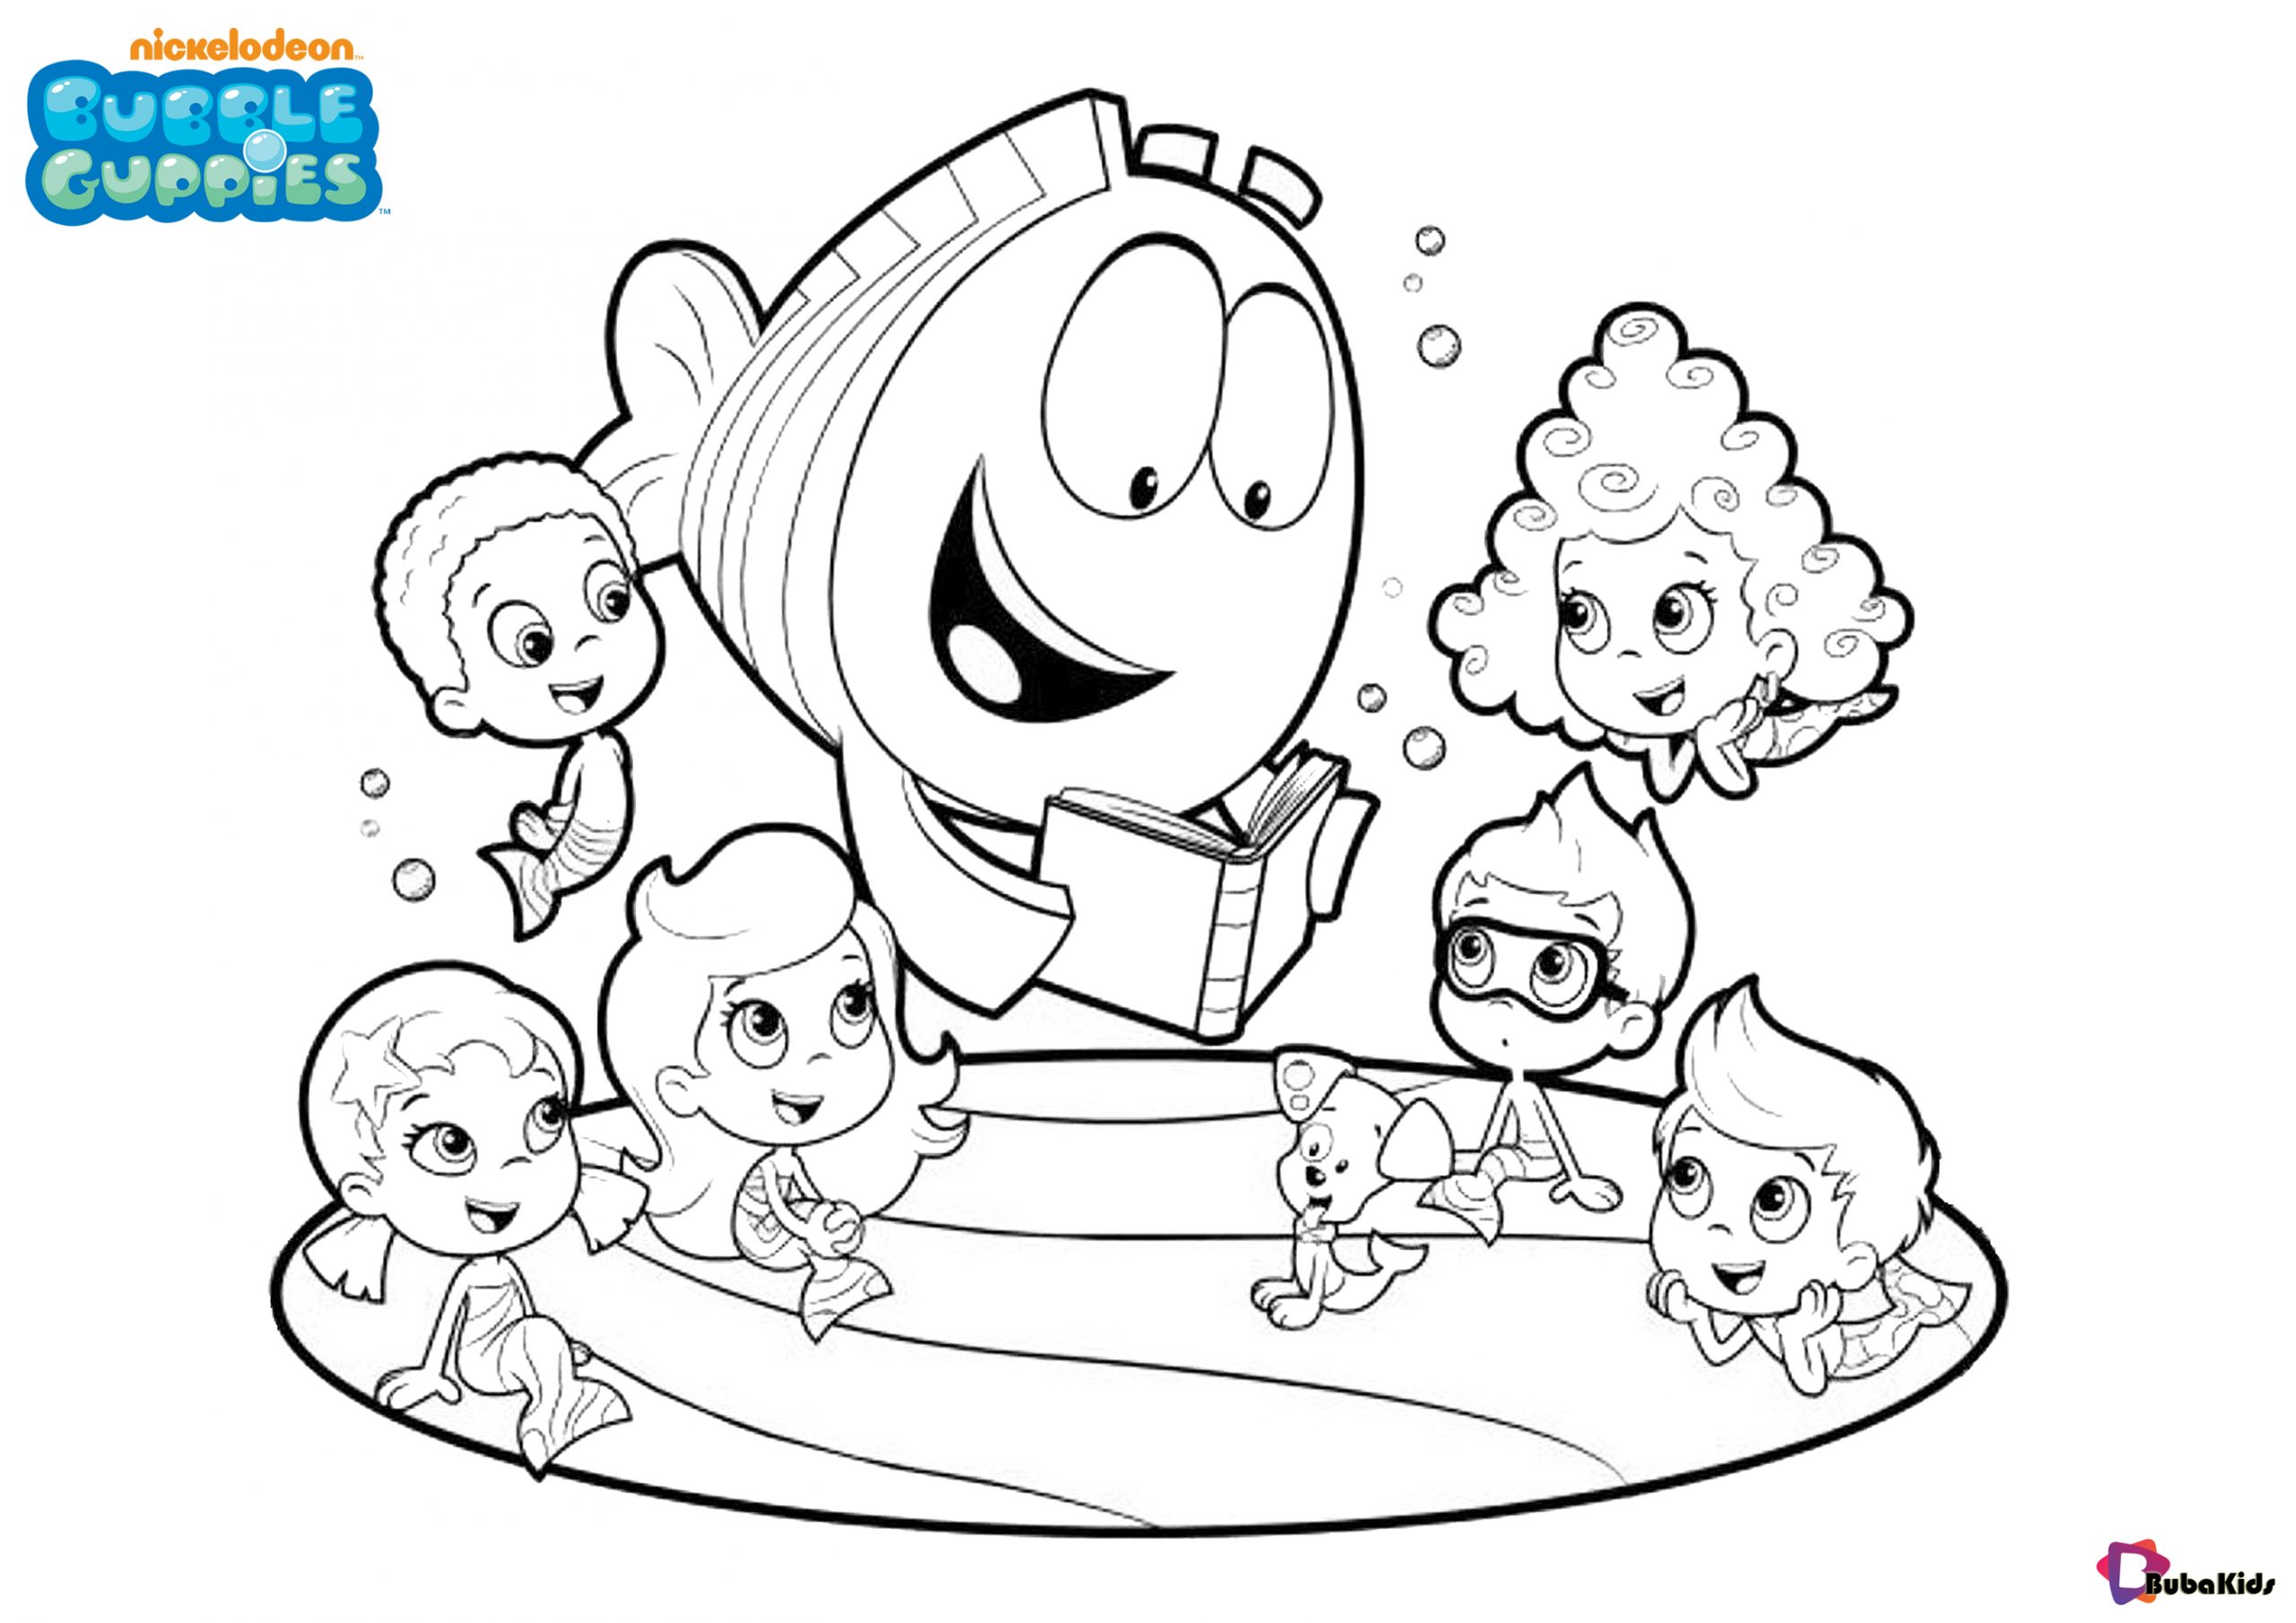 Printable Bubble Guppies coloring pages free download to print Wallpaper